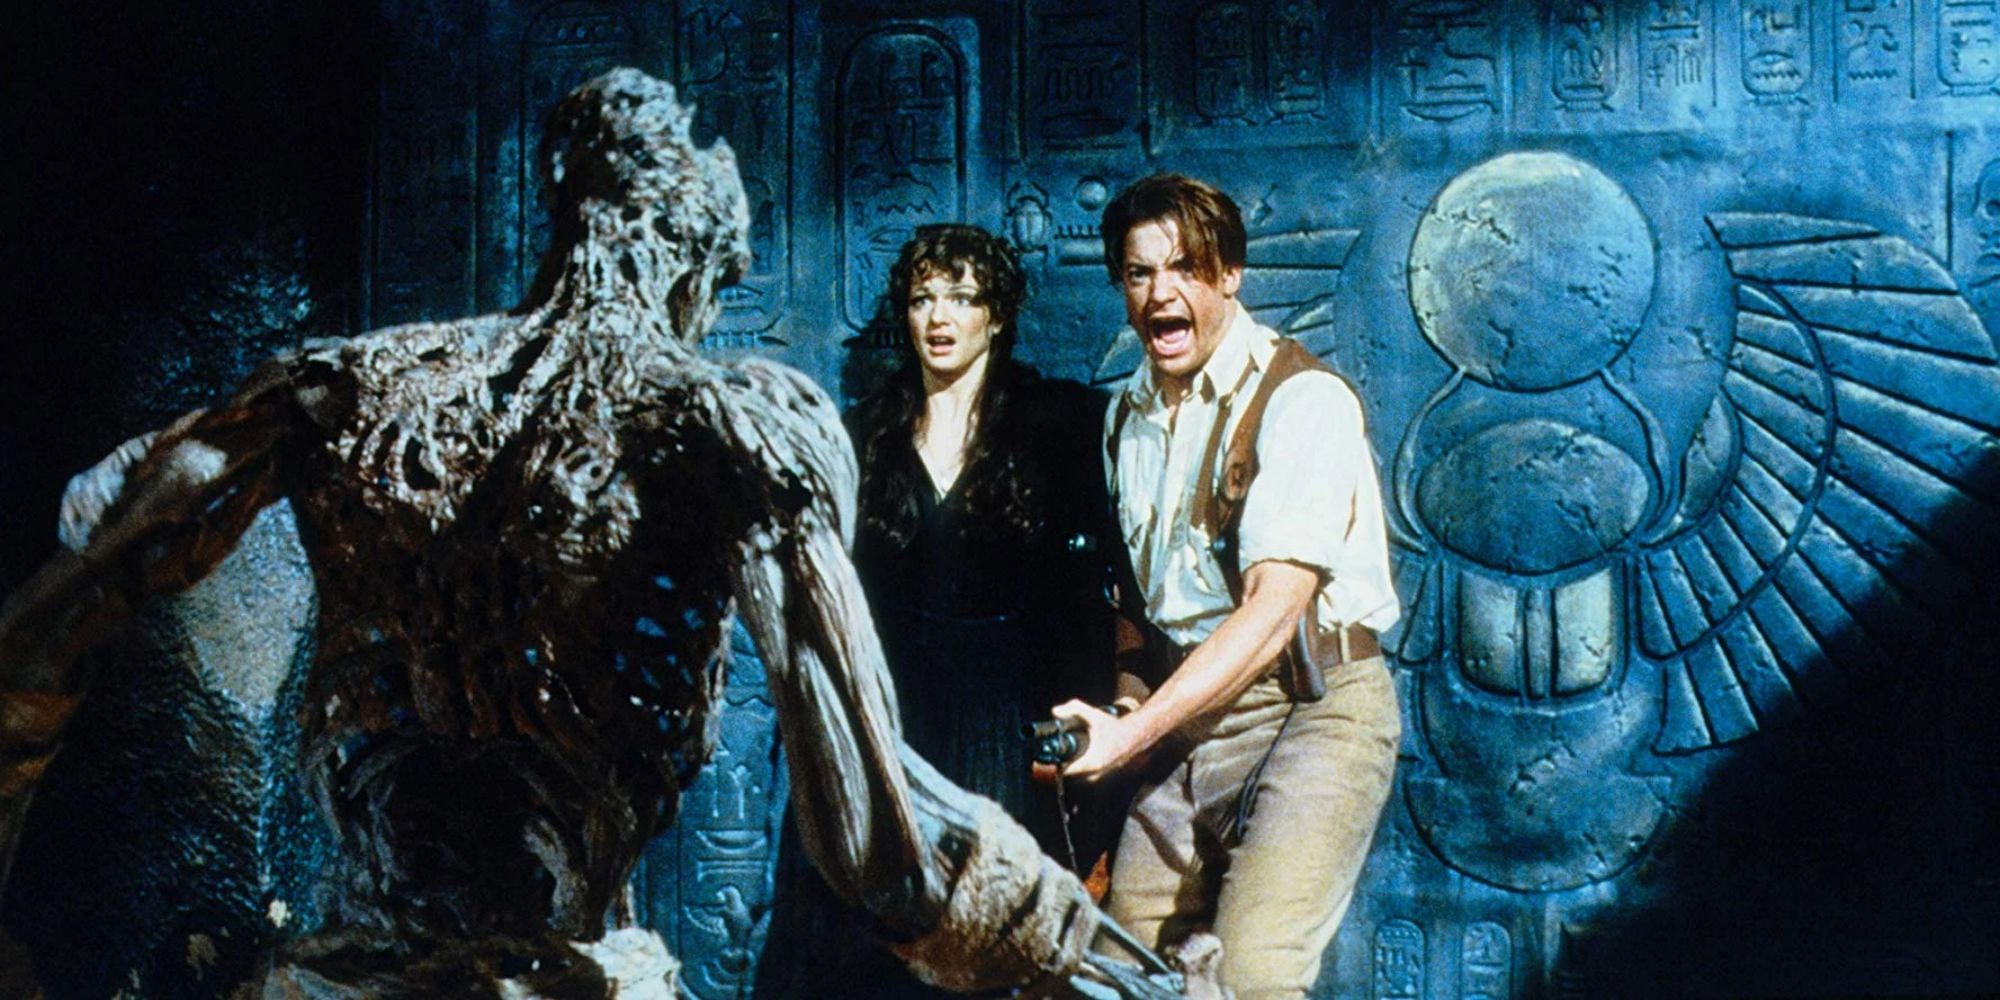 Rick screams as a mummy approaches in The Mummy